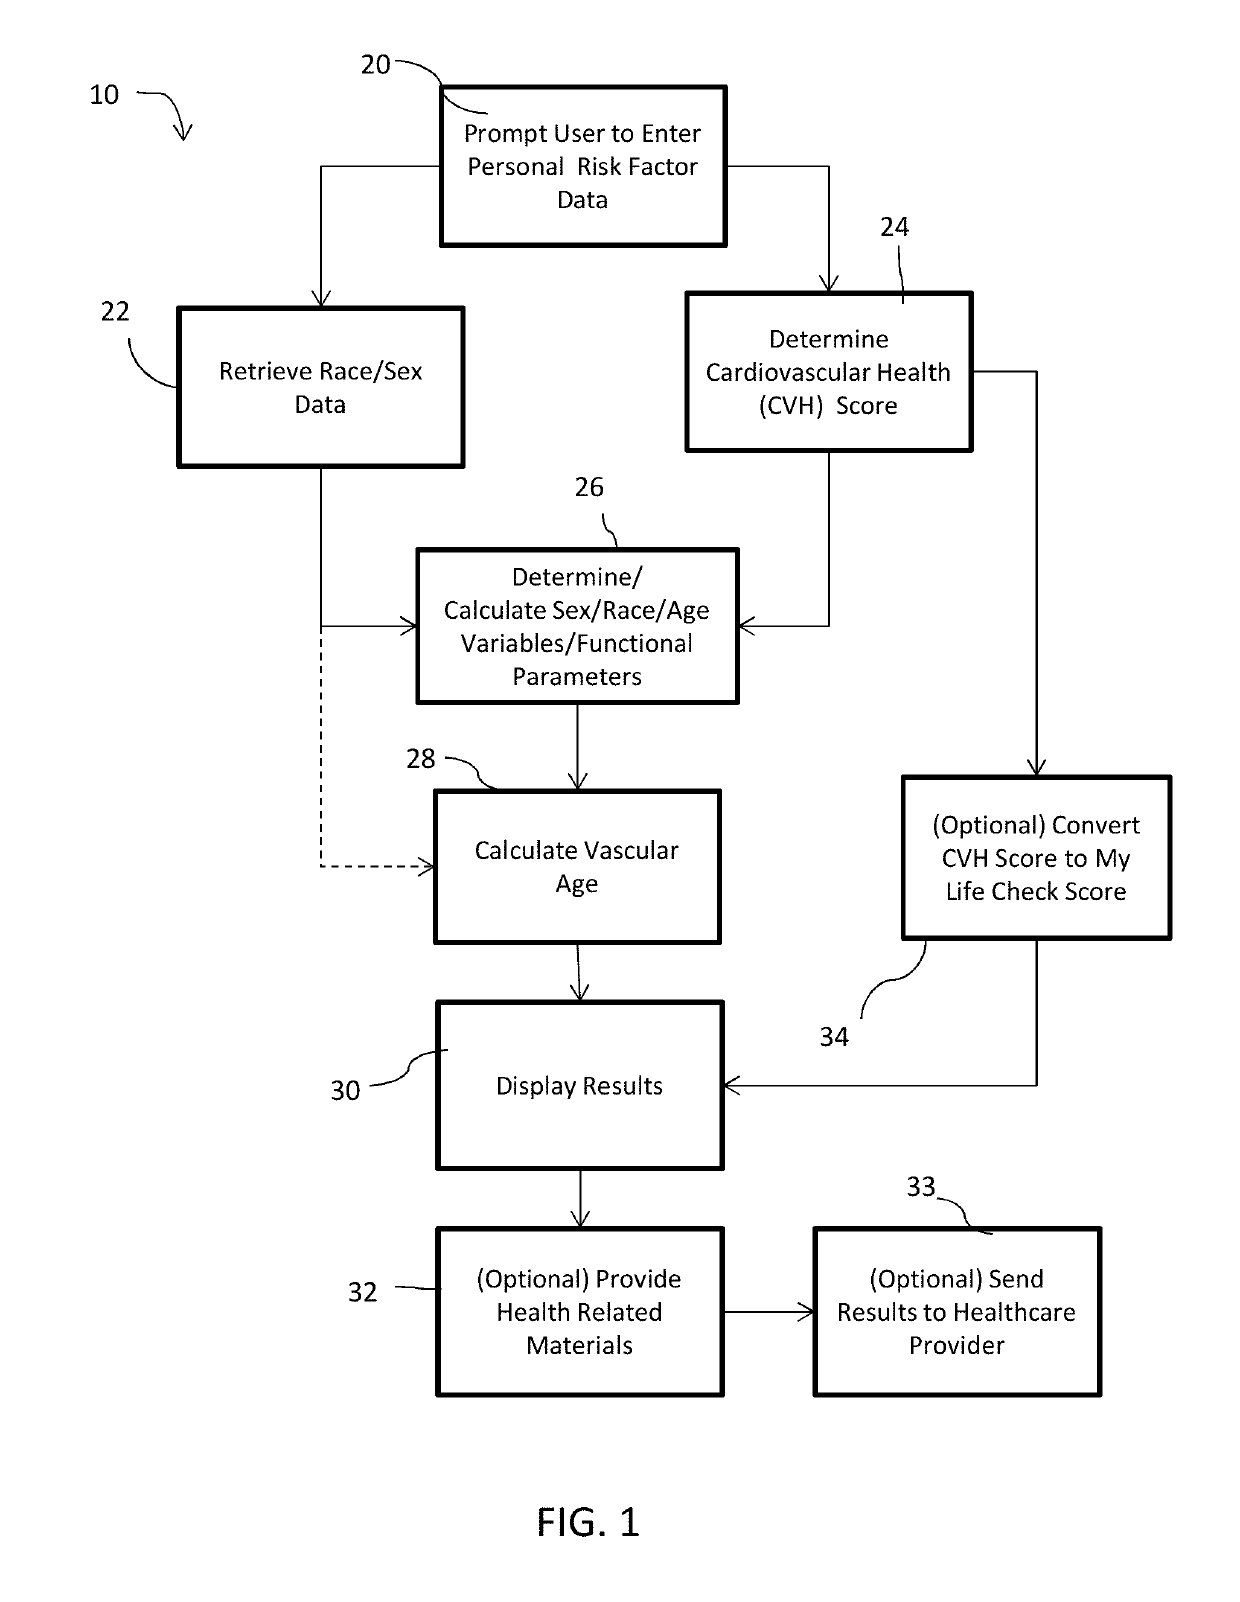 System and Method for Assessing Heart Health and Communicating the Assessment to a Patient